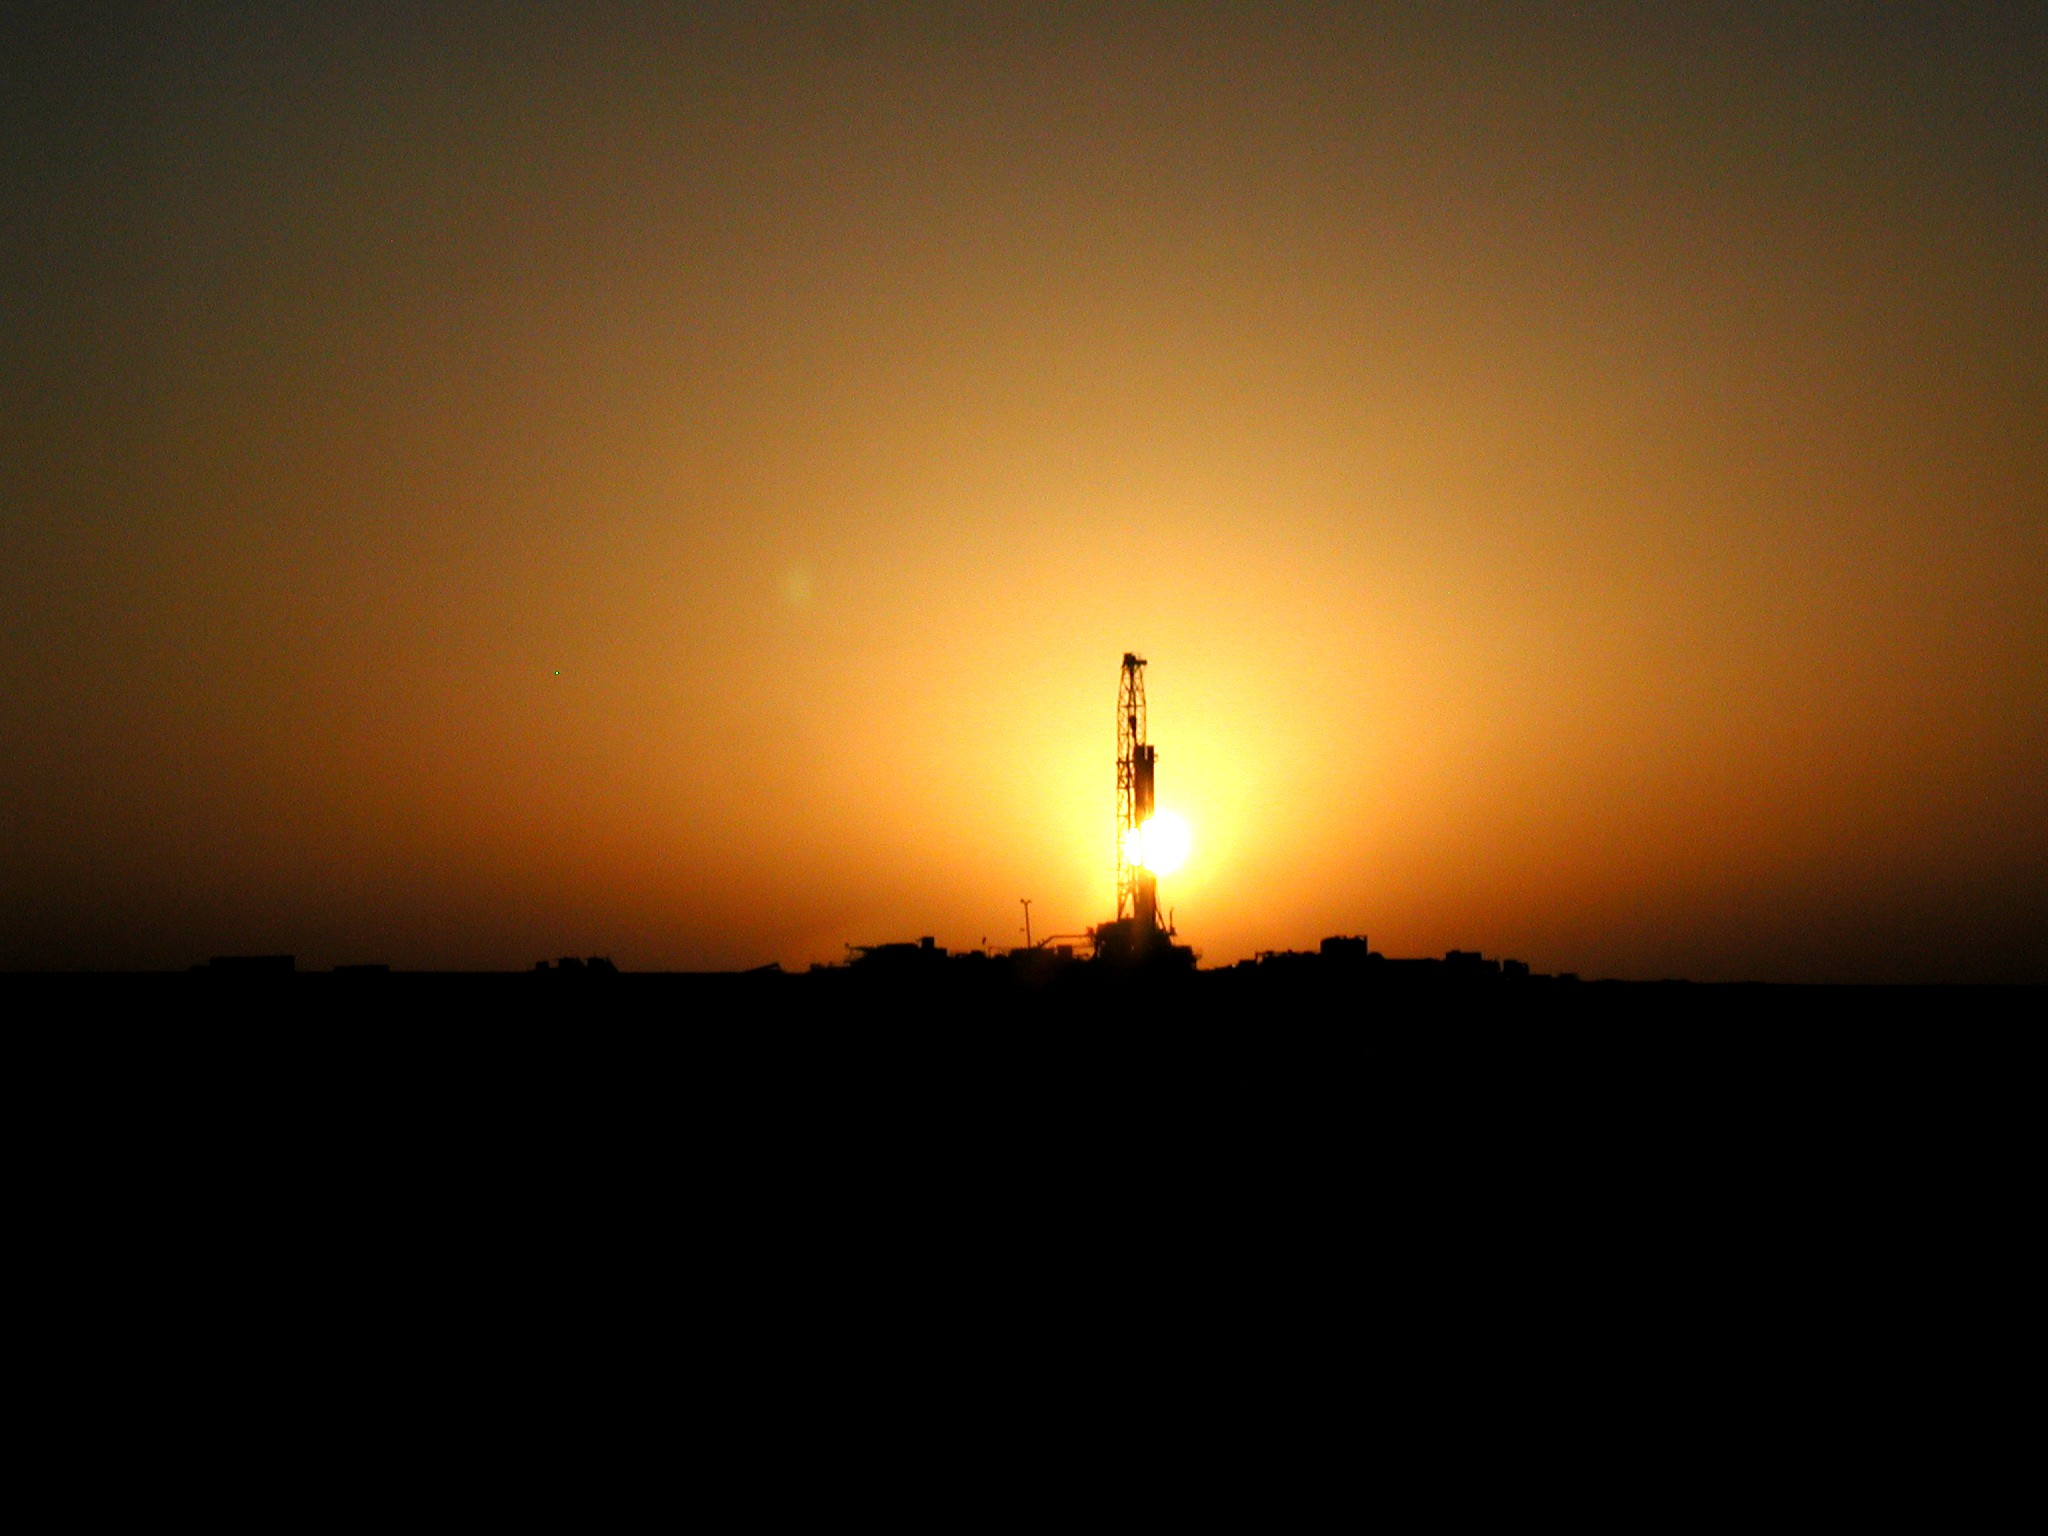 Drilling rig on the background of sunset